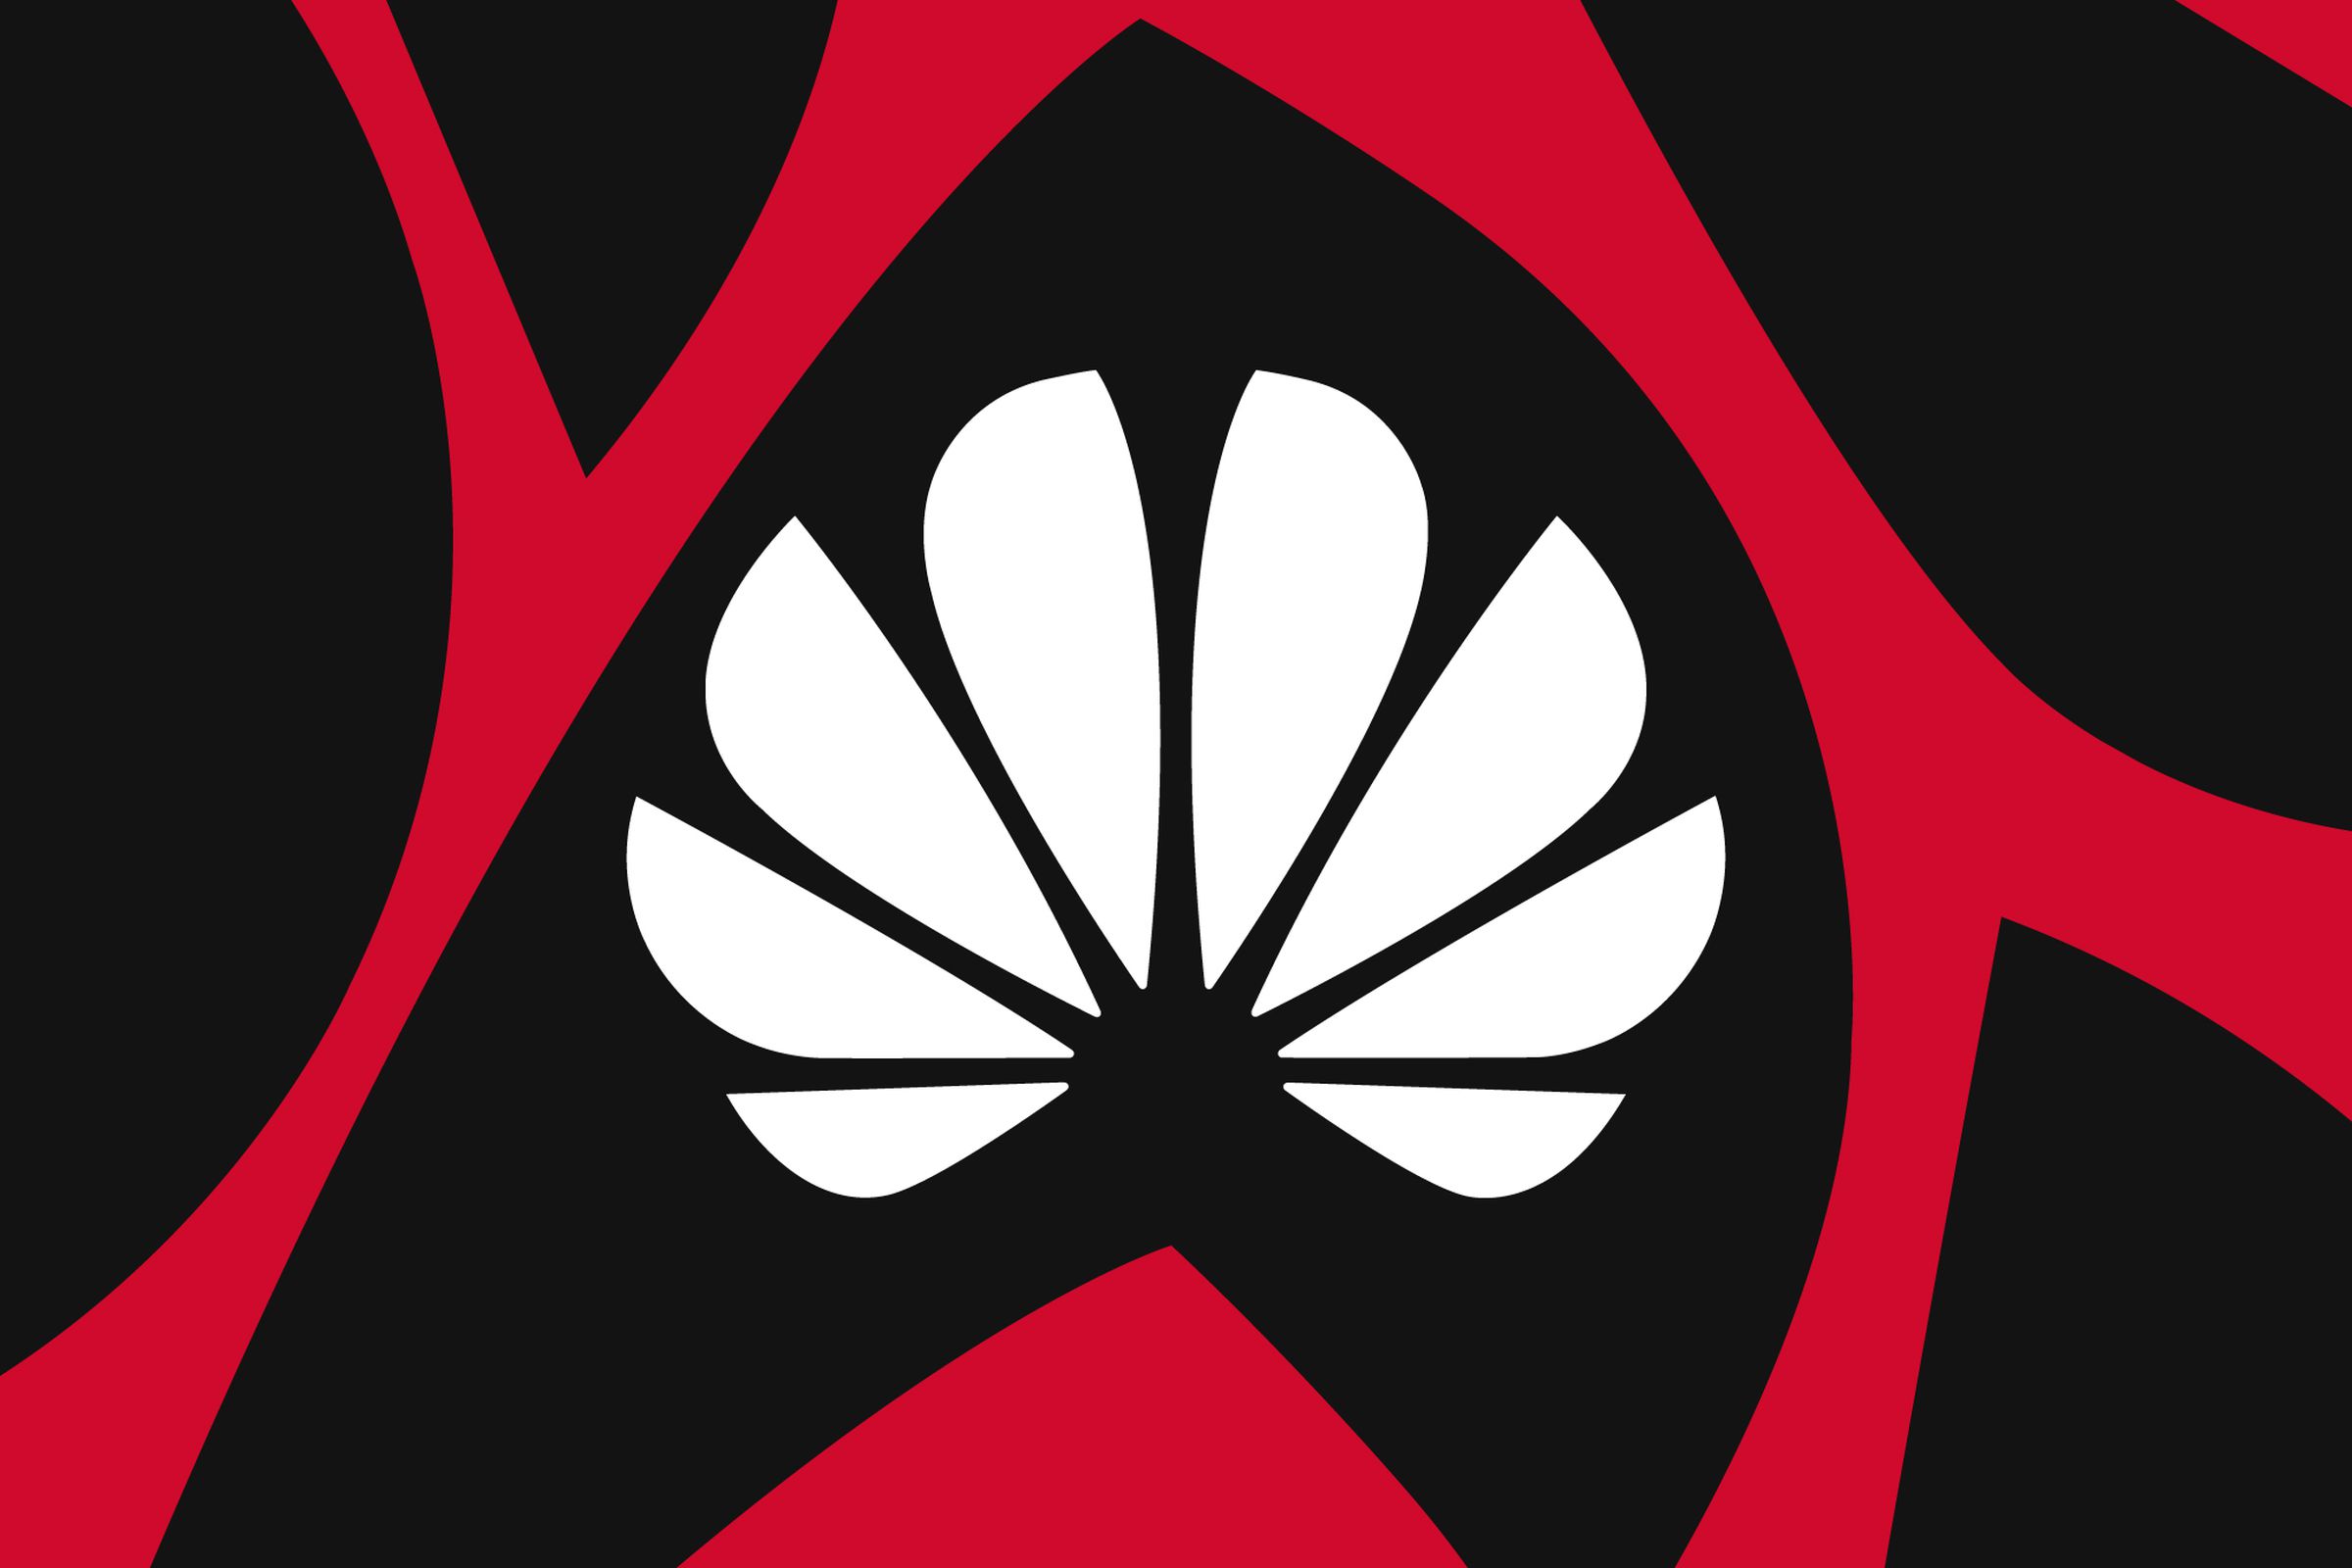 The Huawei logo imposed on a red and black background.